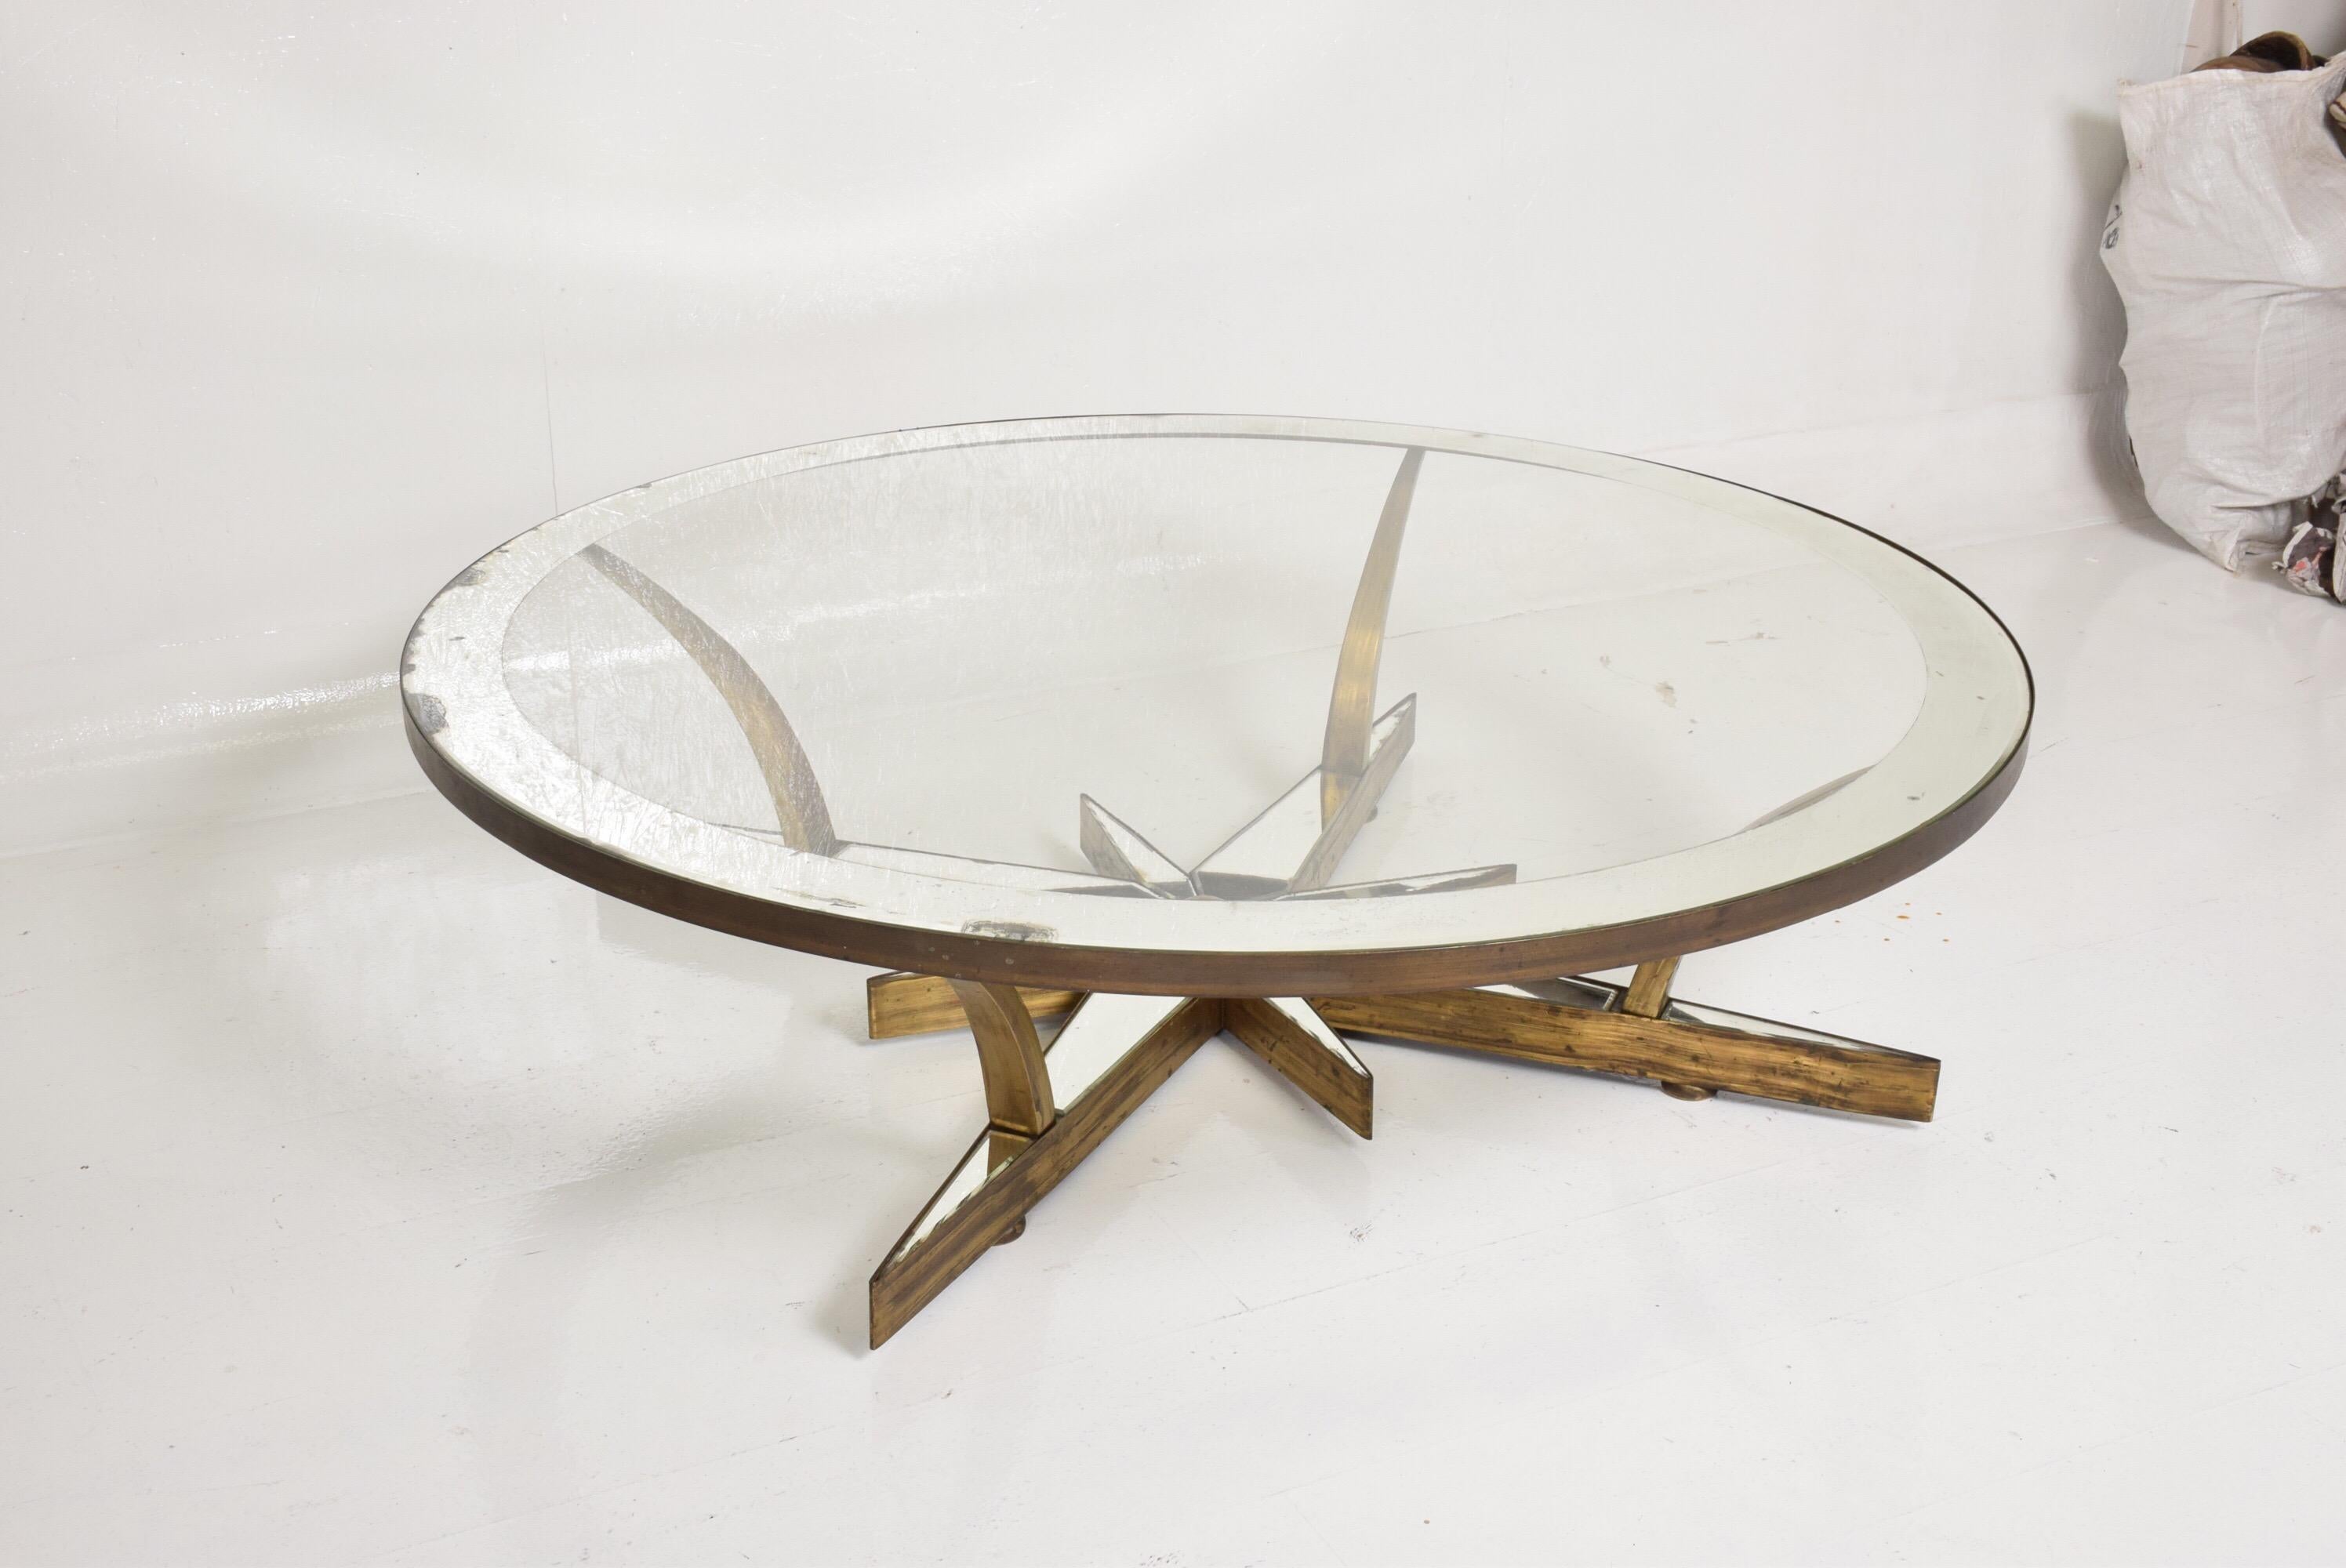 For your consideration, a Mid-Century Modern star coffee - cocktail table attributed to Arturo Pani.
Unique design with start symbol. Original antique mirror with oxidized patina.
Dimensions:
14 1/2